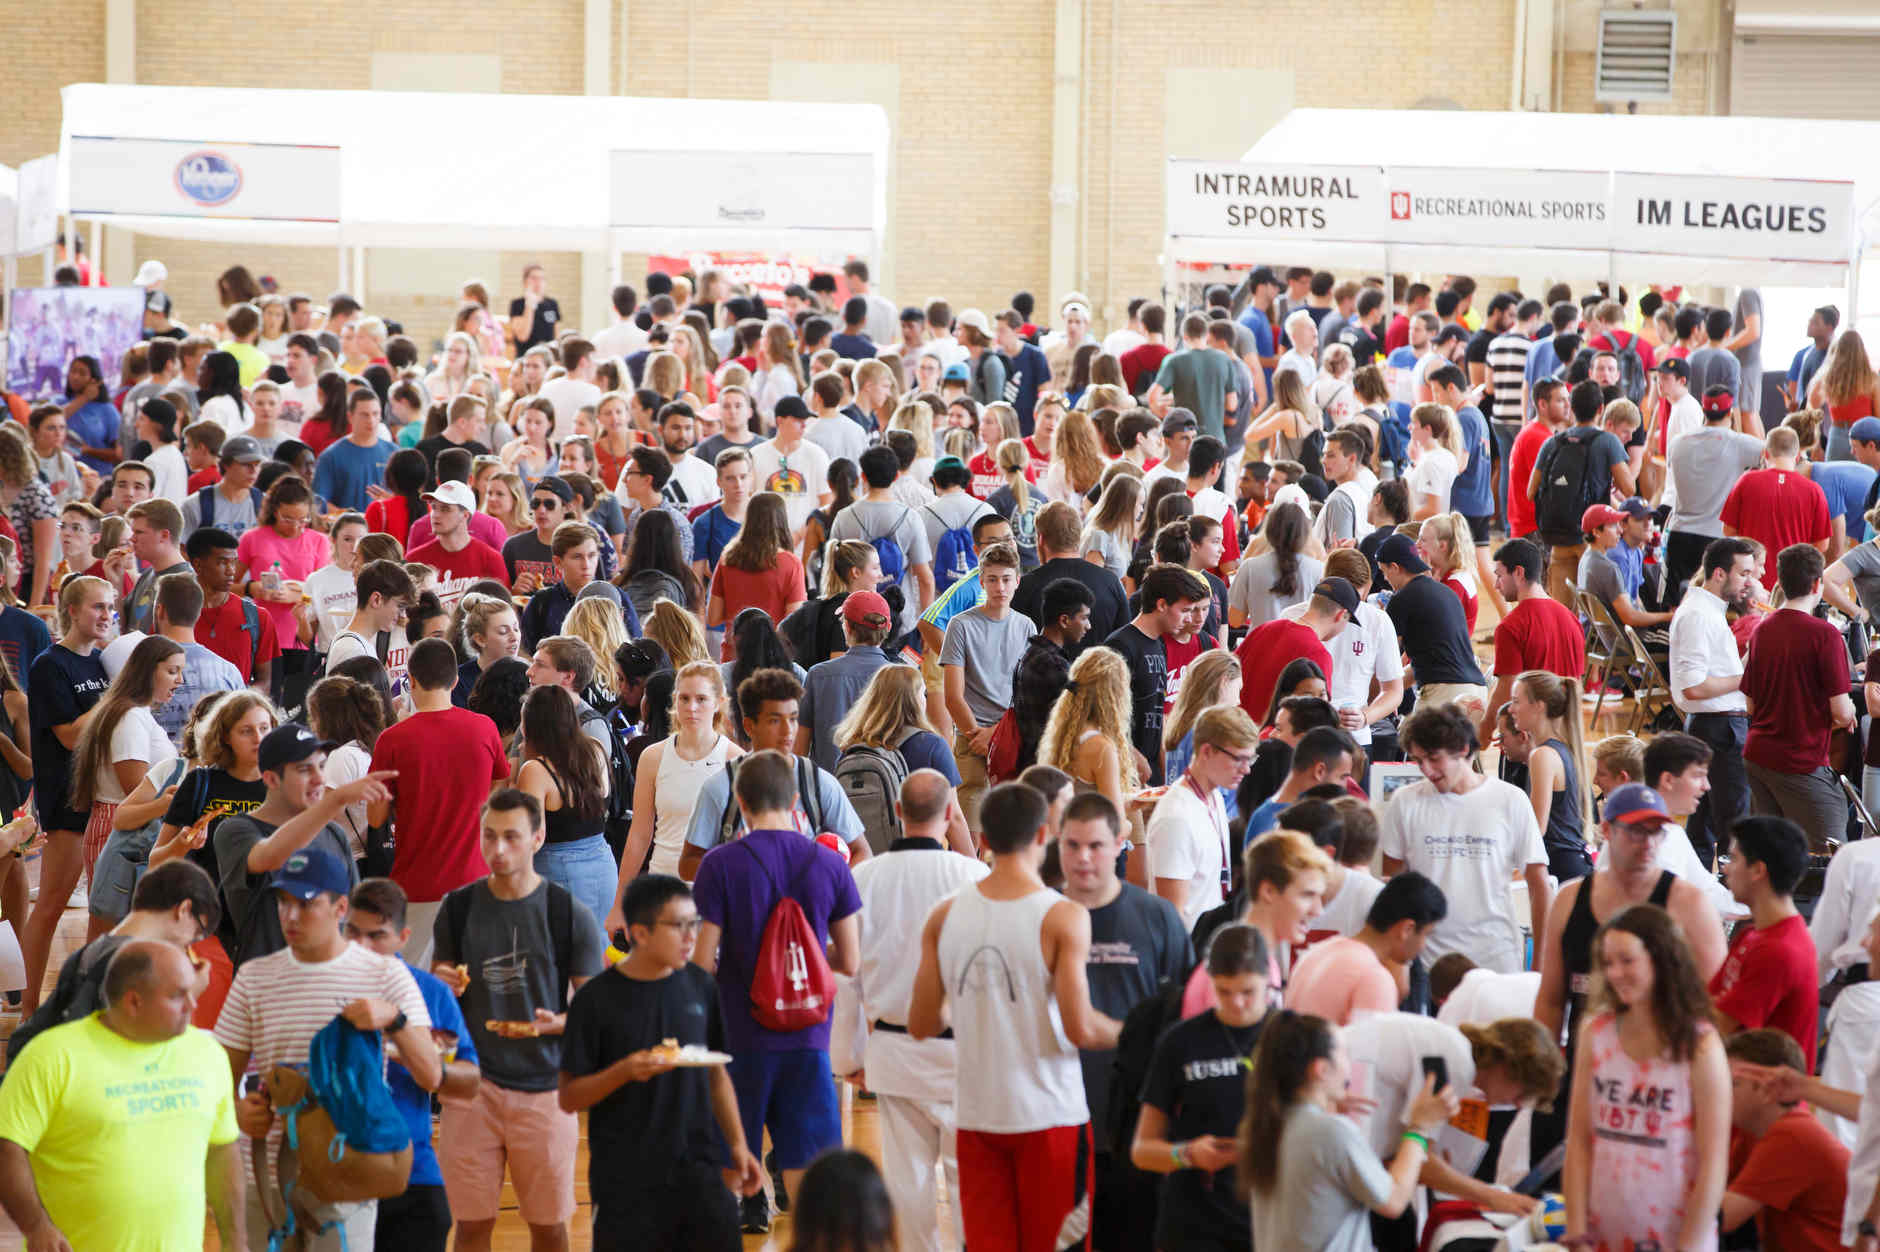 Students walk past booths during RecFest in the Intramural Center at IU Bloomington on Friday, Aug. 23, 2019. (James Brosher/Indiana University)